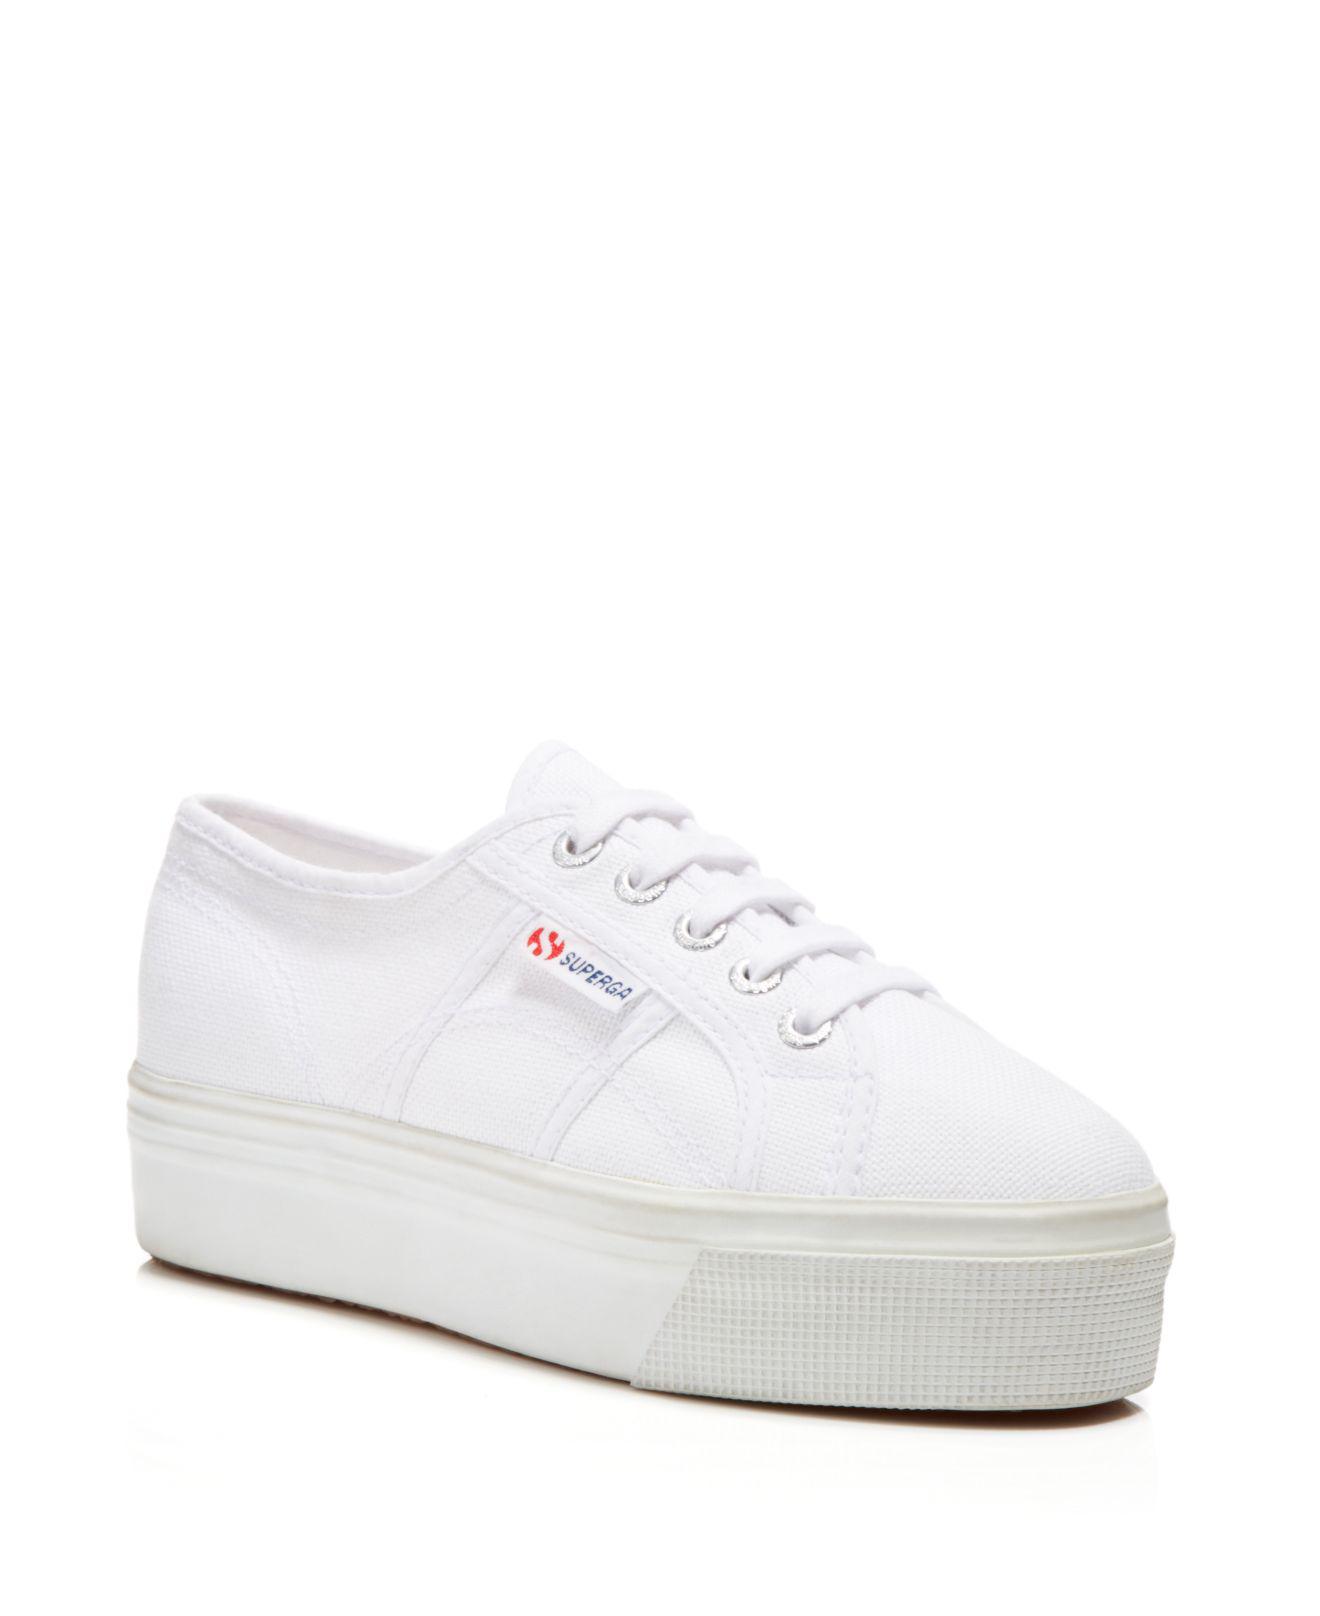 Superga Lace Up Platform Sneakers in White - Lyst